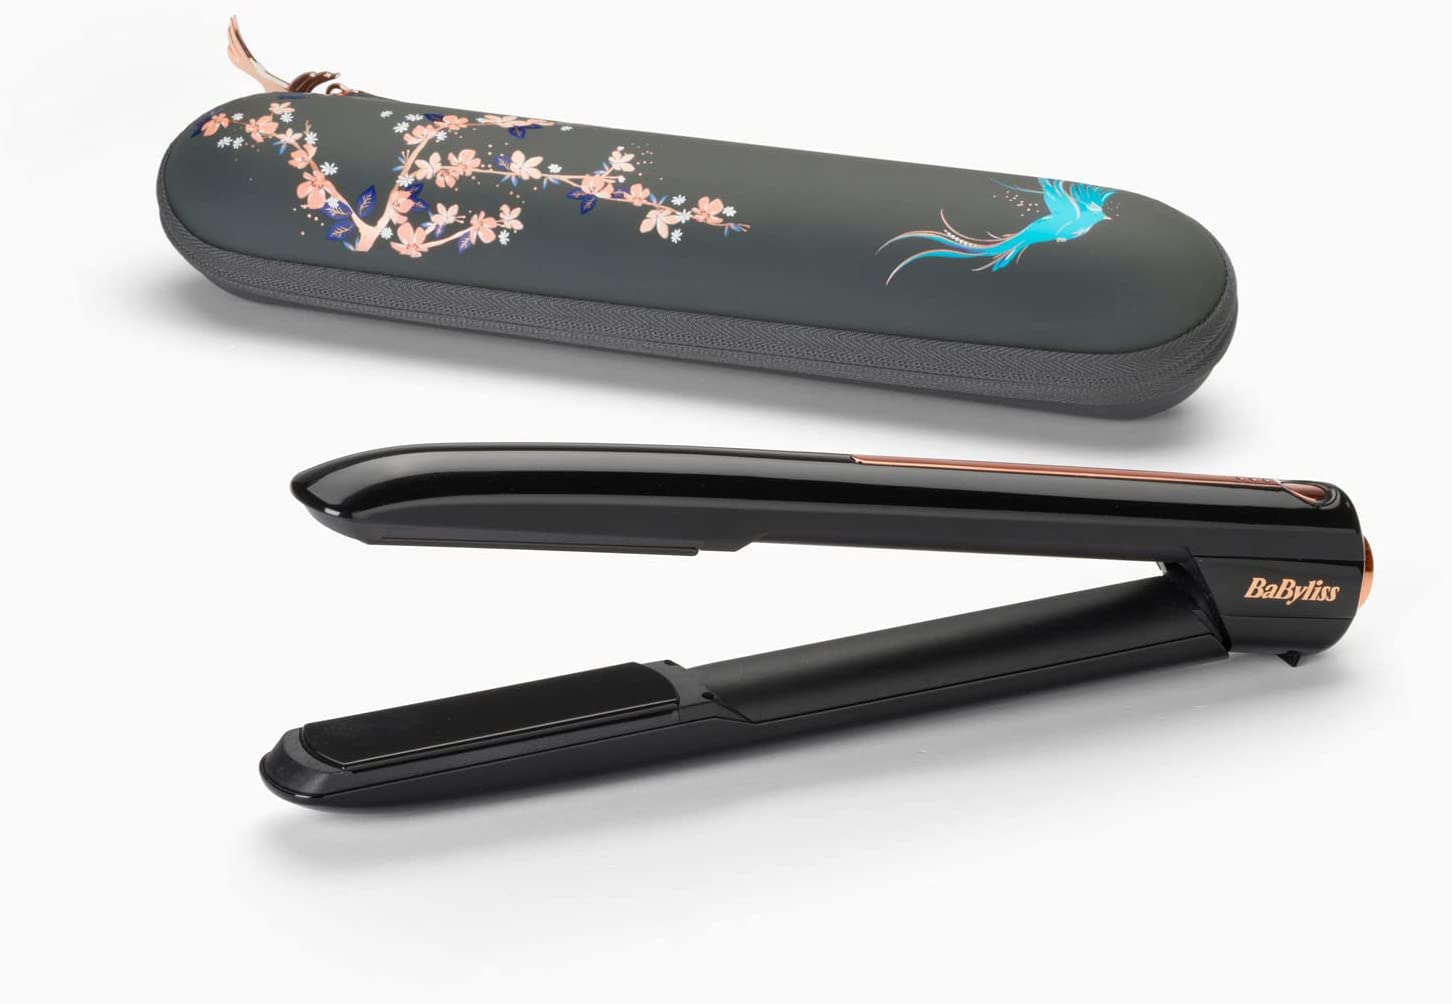 Babyliss 9000RU Wireless Hair Straightener with Battery, Ceramic Plates for Smoother Hair, 15 Sec. Quick Heating, Straightening Hair 200°C Max, Without Cable, 500 g Light